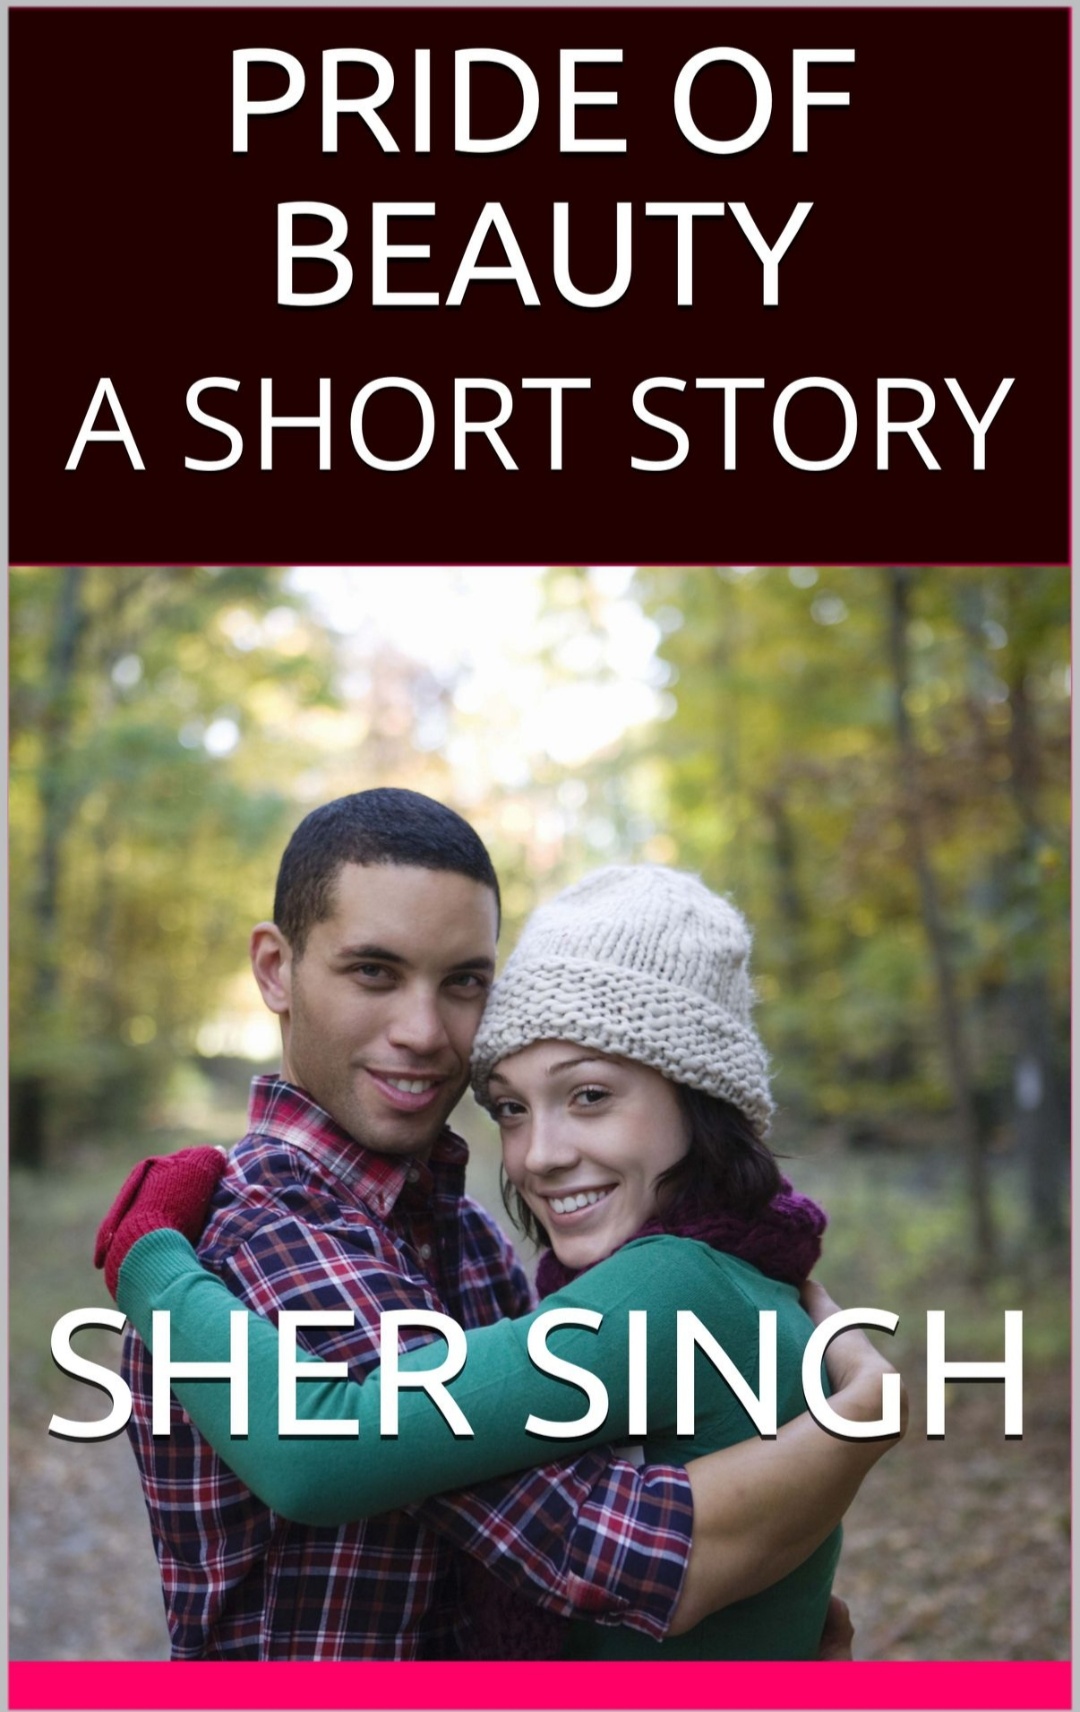 FREE: PRIDE OF BEAUTY A SHORT STORY by SHER SINGH